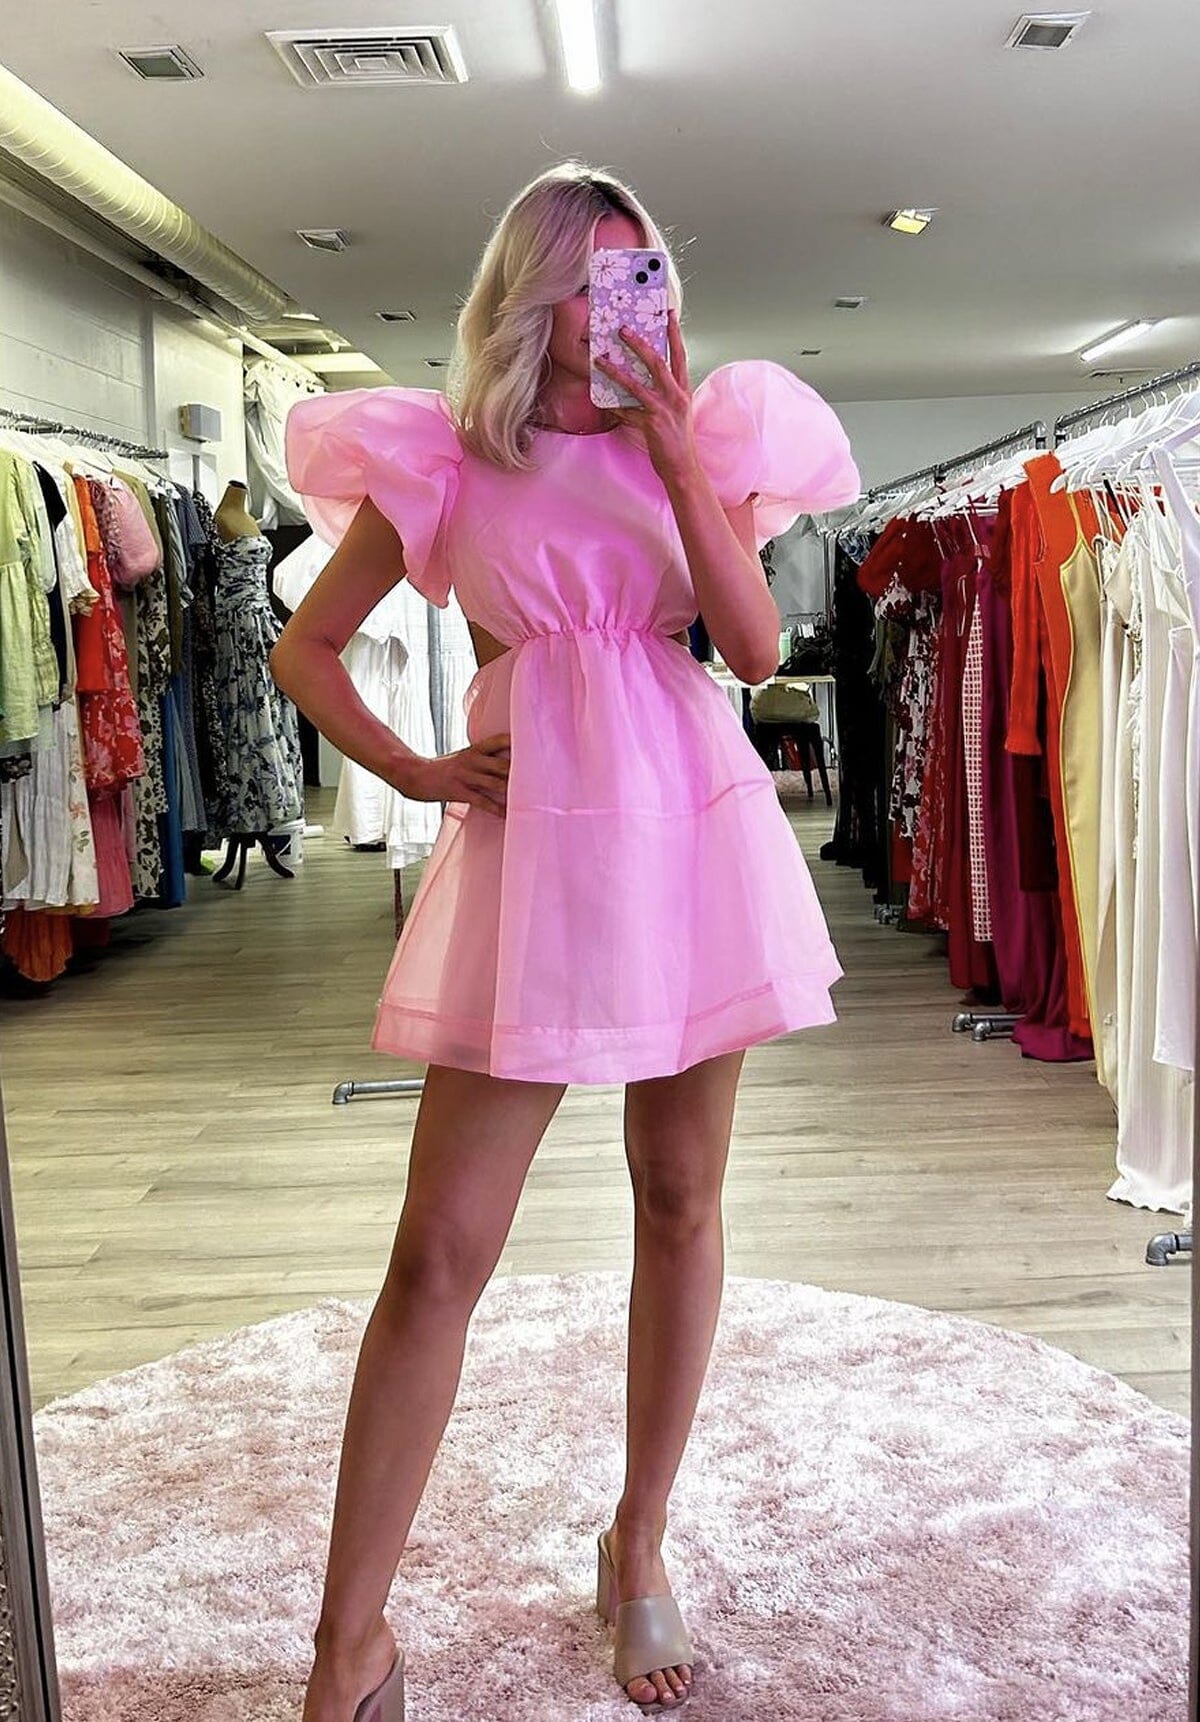 Simplicity Cut Out Mini Dress Pink Clothing Aje 